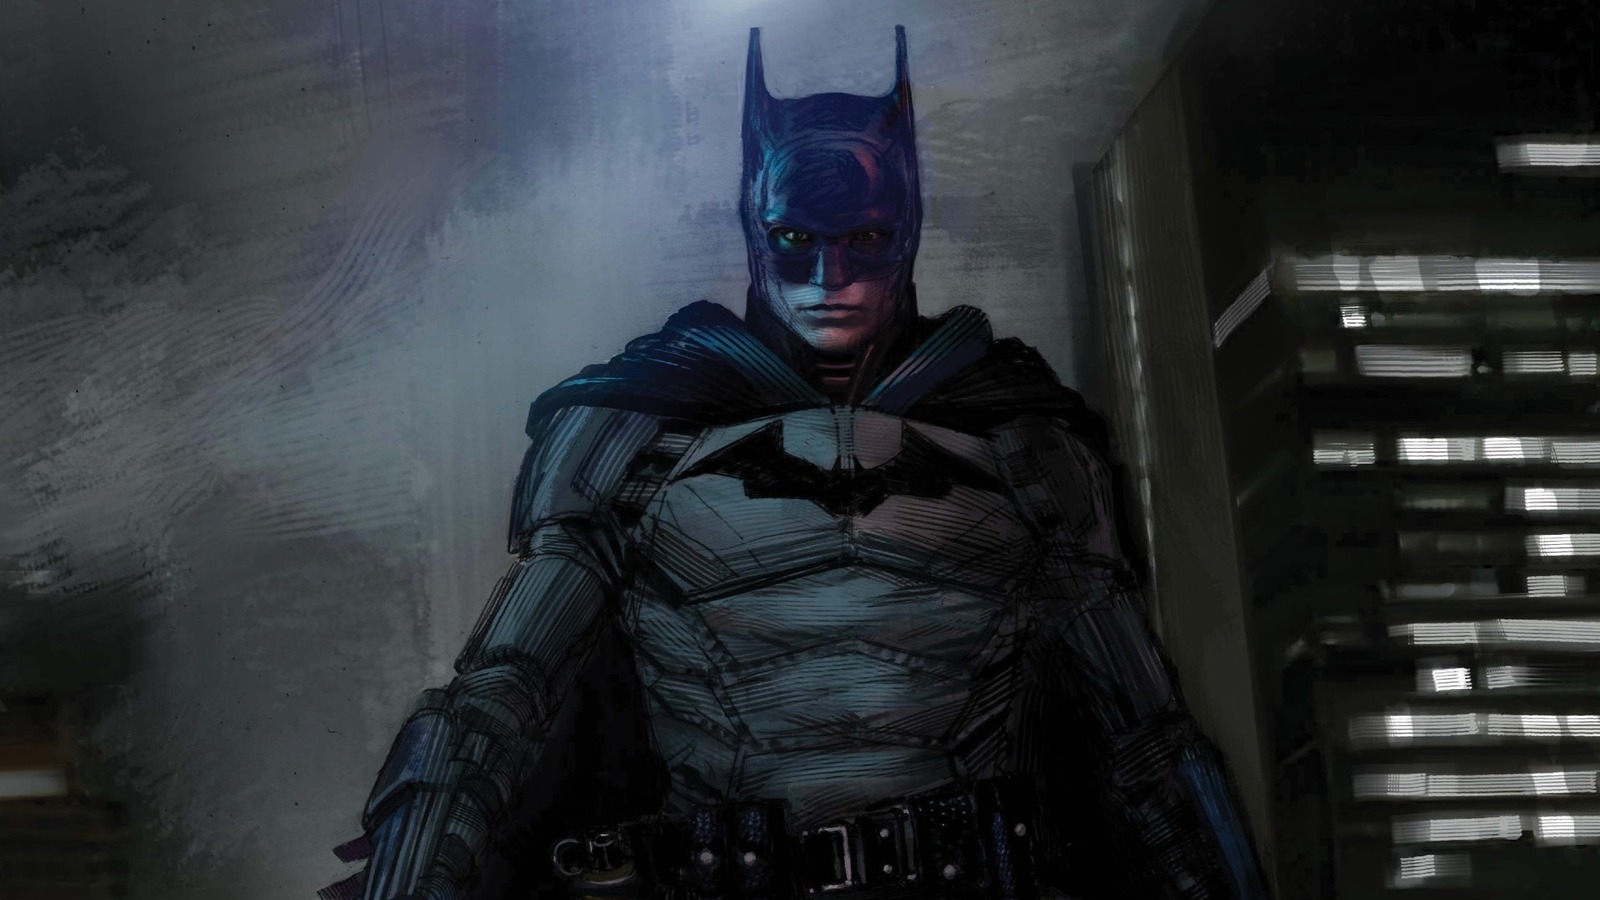 Gotham Knights gets October 2022 release date